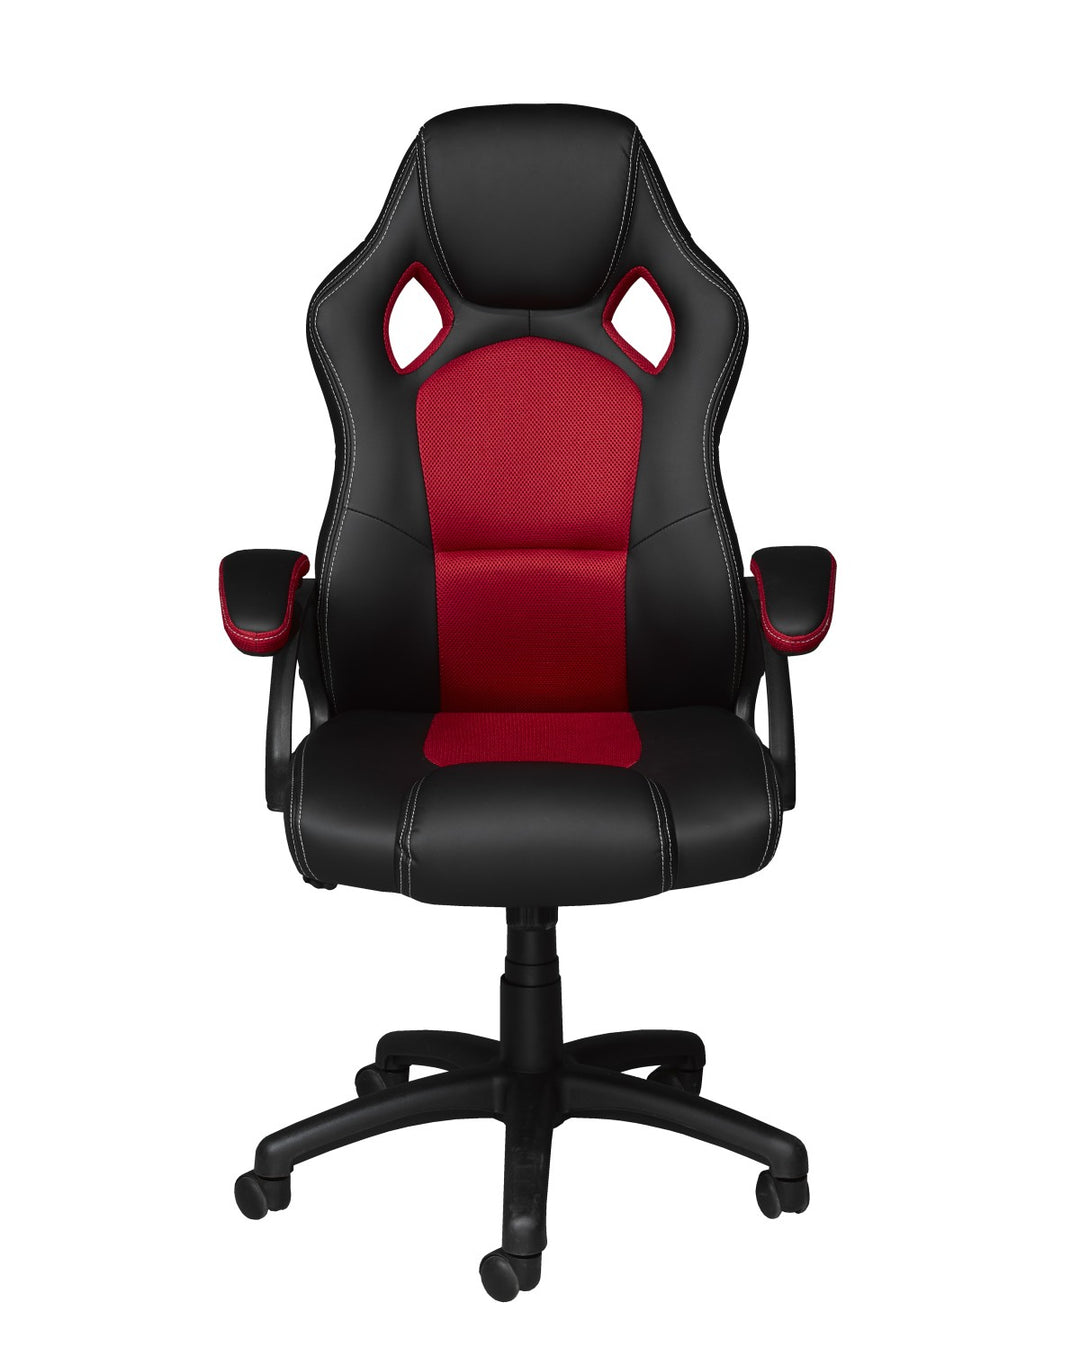 Black/Red Ergonomic Design Gaming Chair | Breathable Fabric/Mesh, and 360-Degree Maneuverability